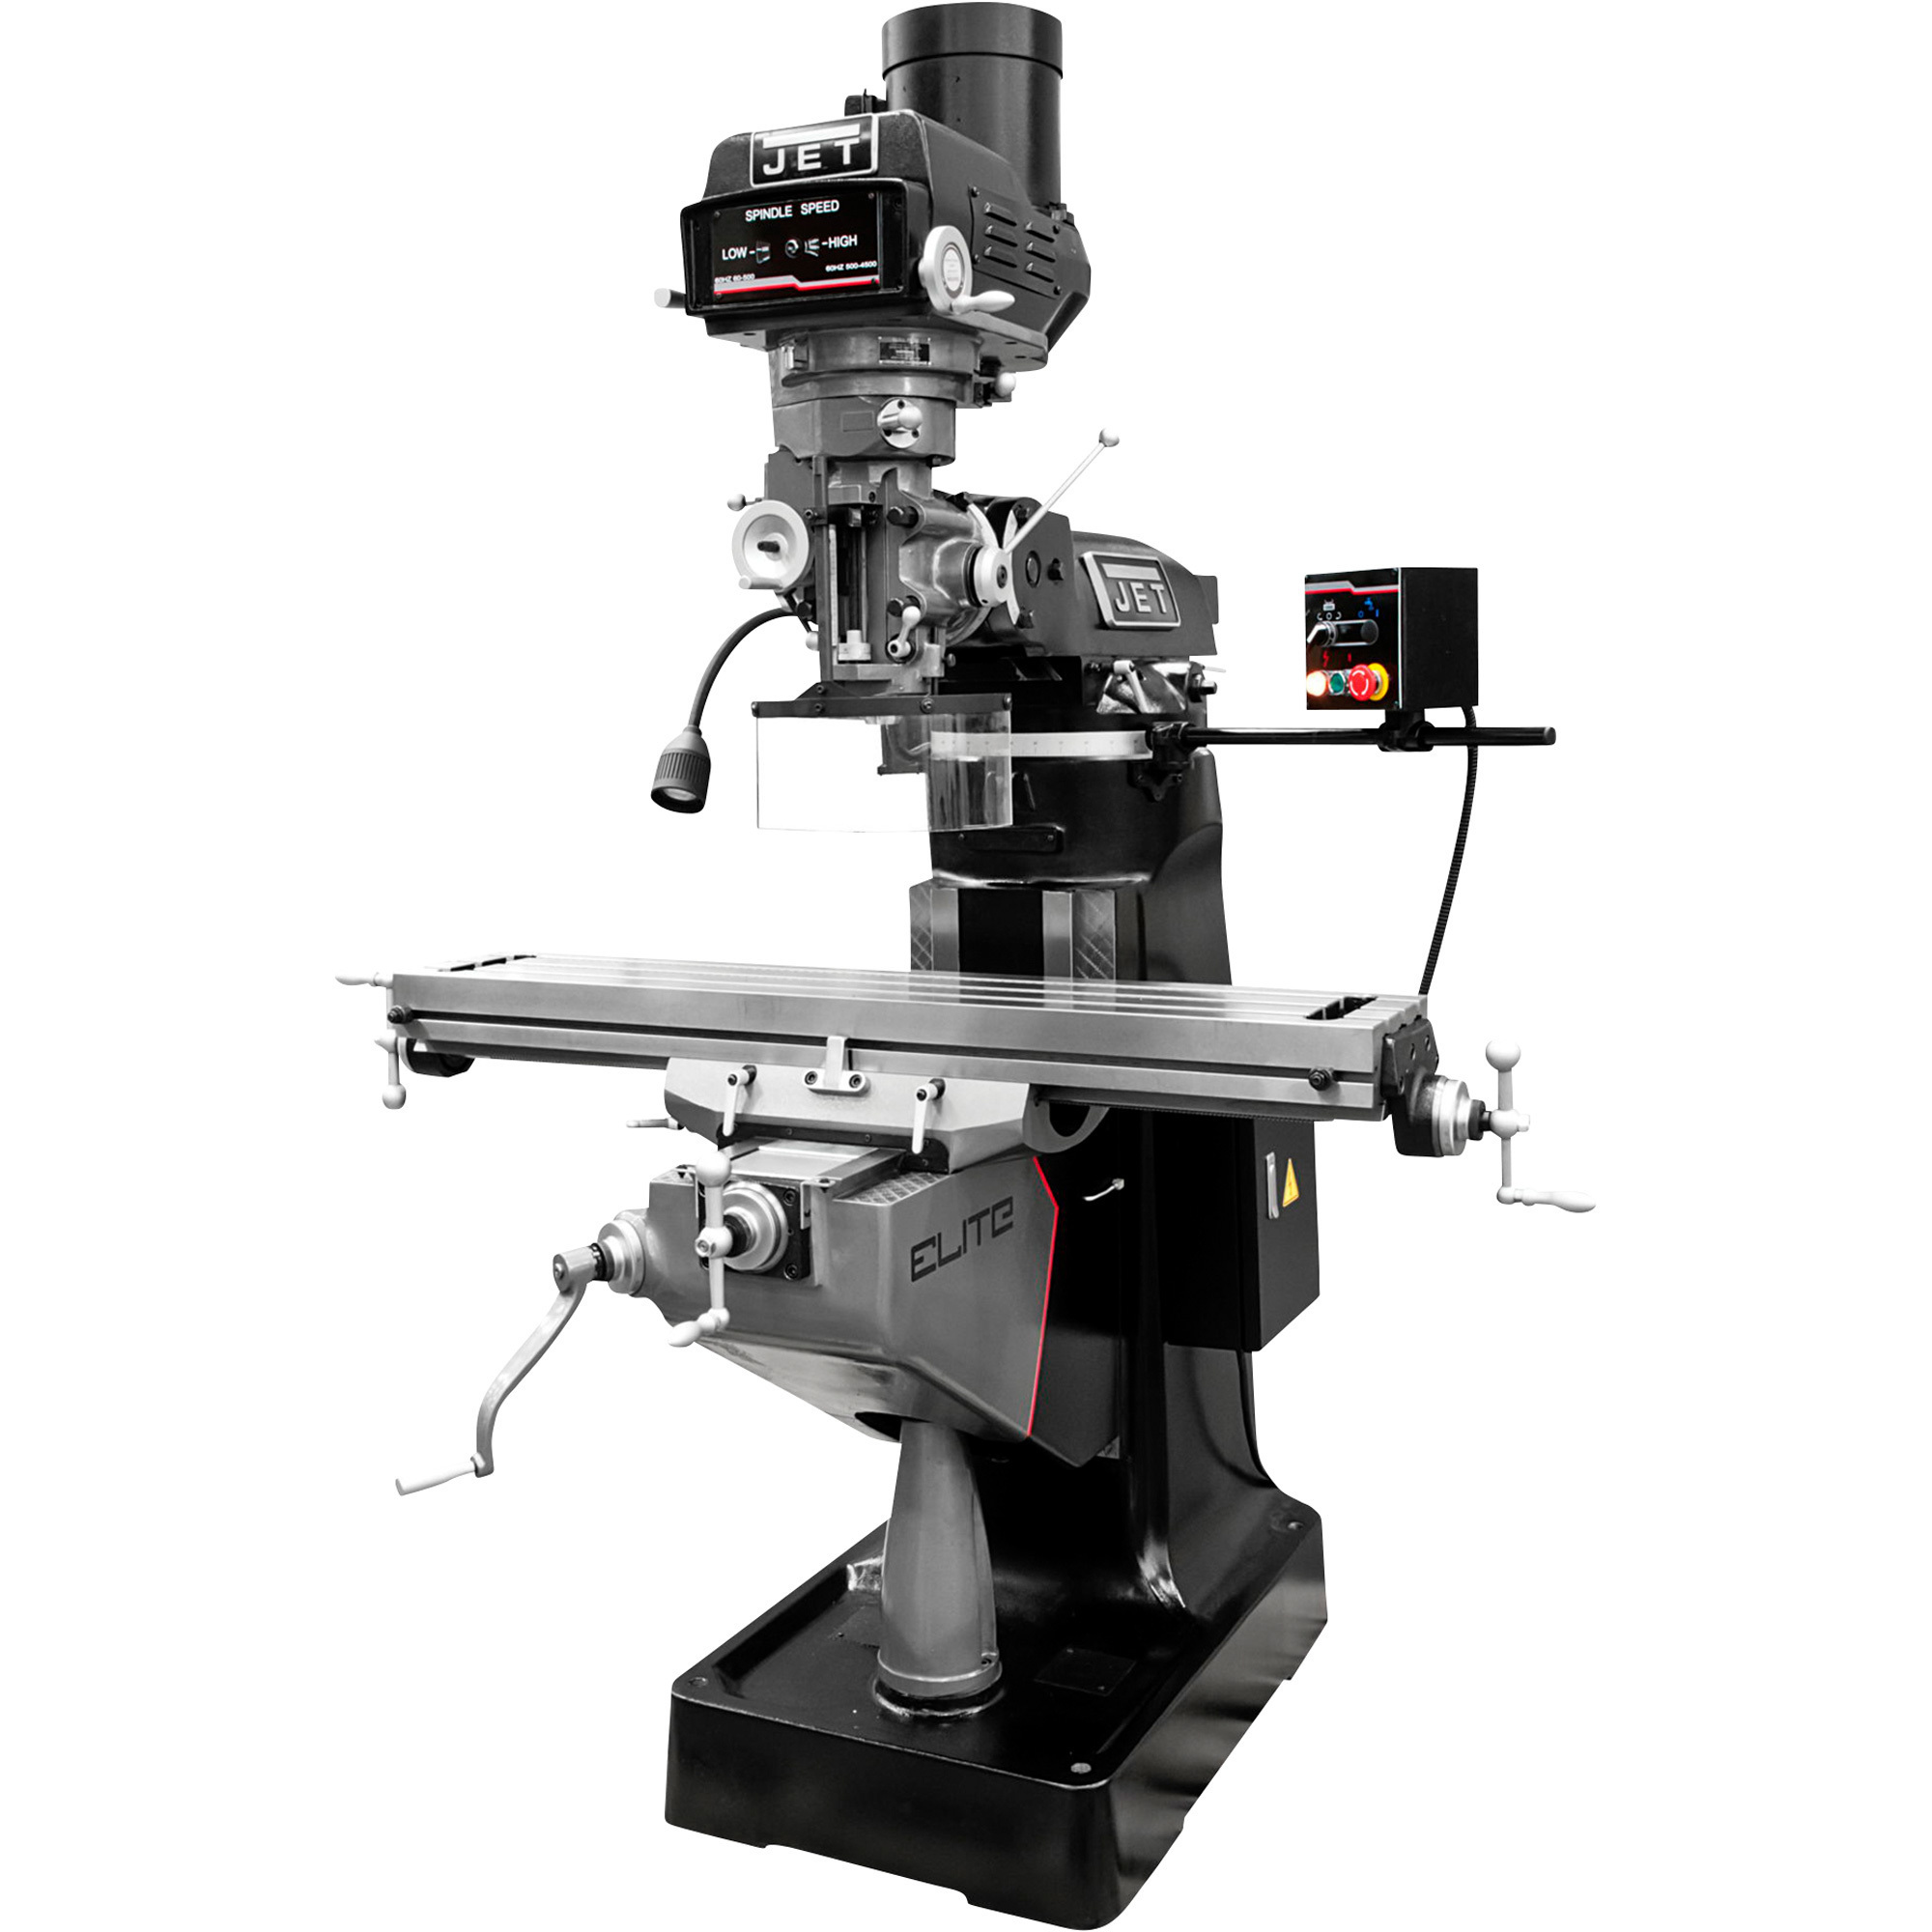 JET Elite Mill with Servo X, Y, Z-Axis Powerfeeds and Air Powered Draw Bar, 9Inch x 49Inch Table, 3 HP, Model ETM-949 -  894180